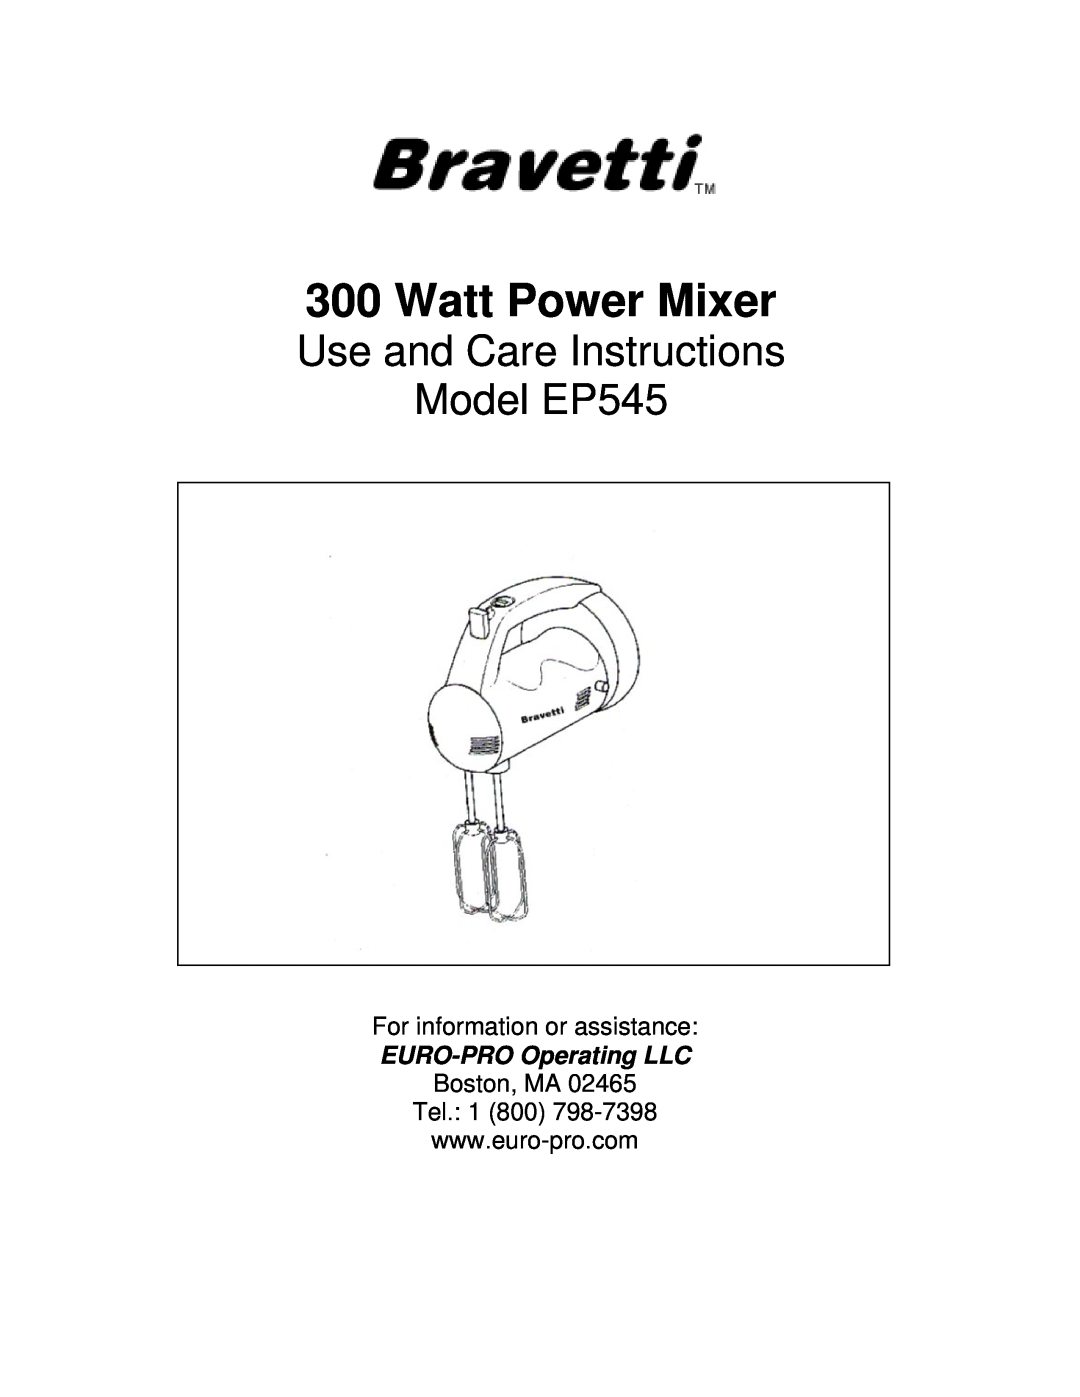 Bravetti manual Watt Power Mixer, For information or assistance, Use and Care Instructions Model EP545 